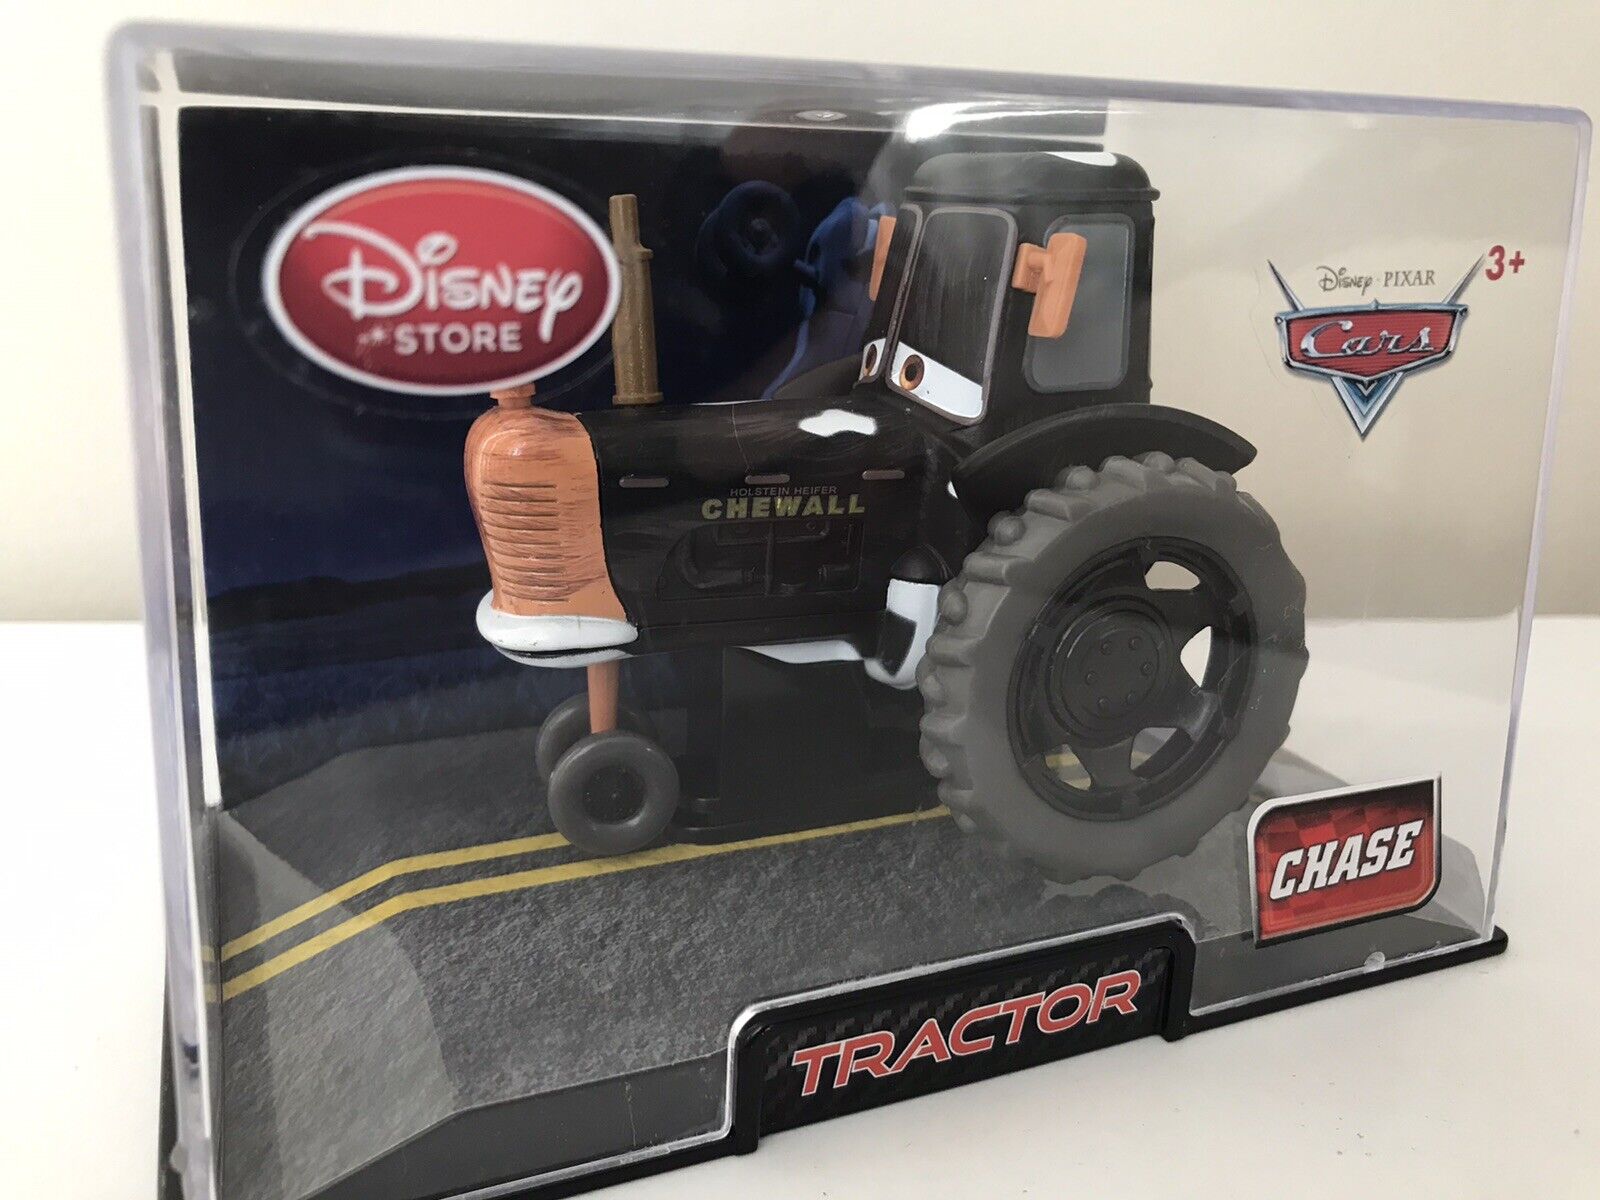 Chase Tractor Chase Die Cast Car Model 1:43 Scale (Disney/Pixar)